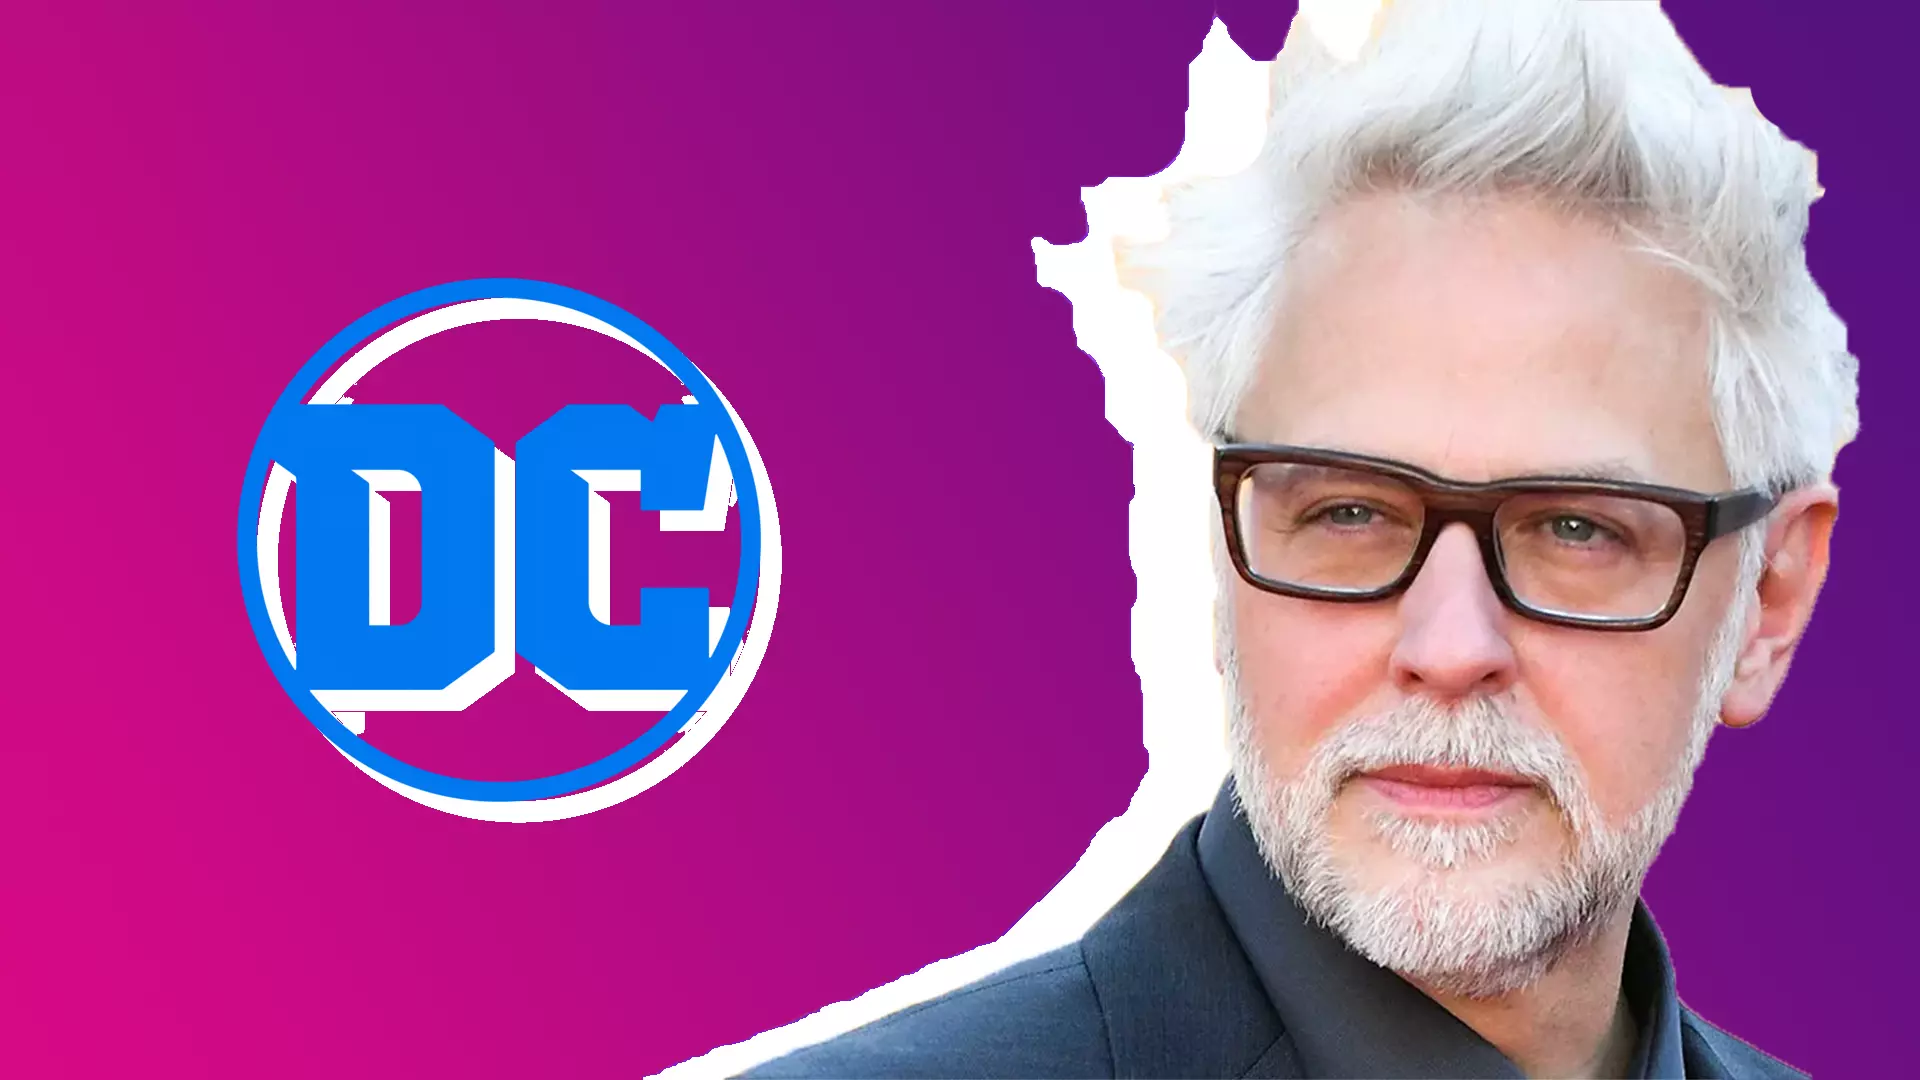 James Gunn will head DC Studios and focus on the development of the DC universe